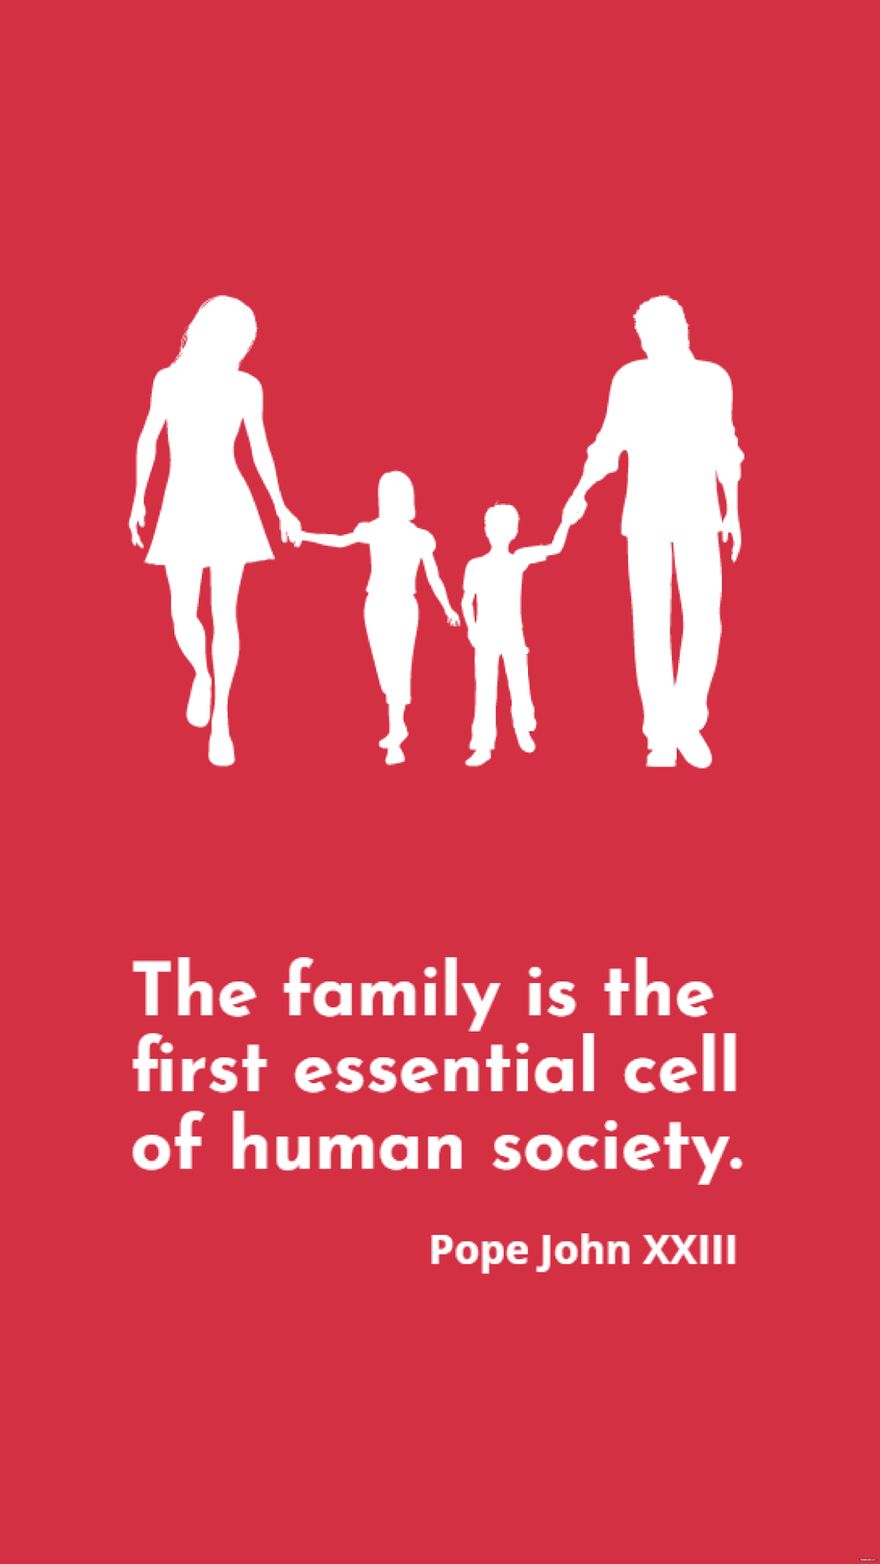 Free Pope John XXIII - The family is the first essential cell of human society. in JPG